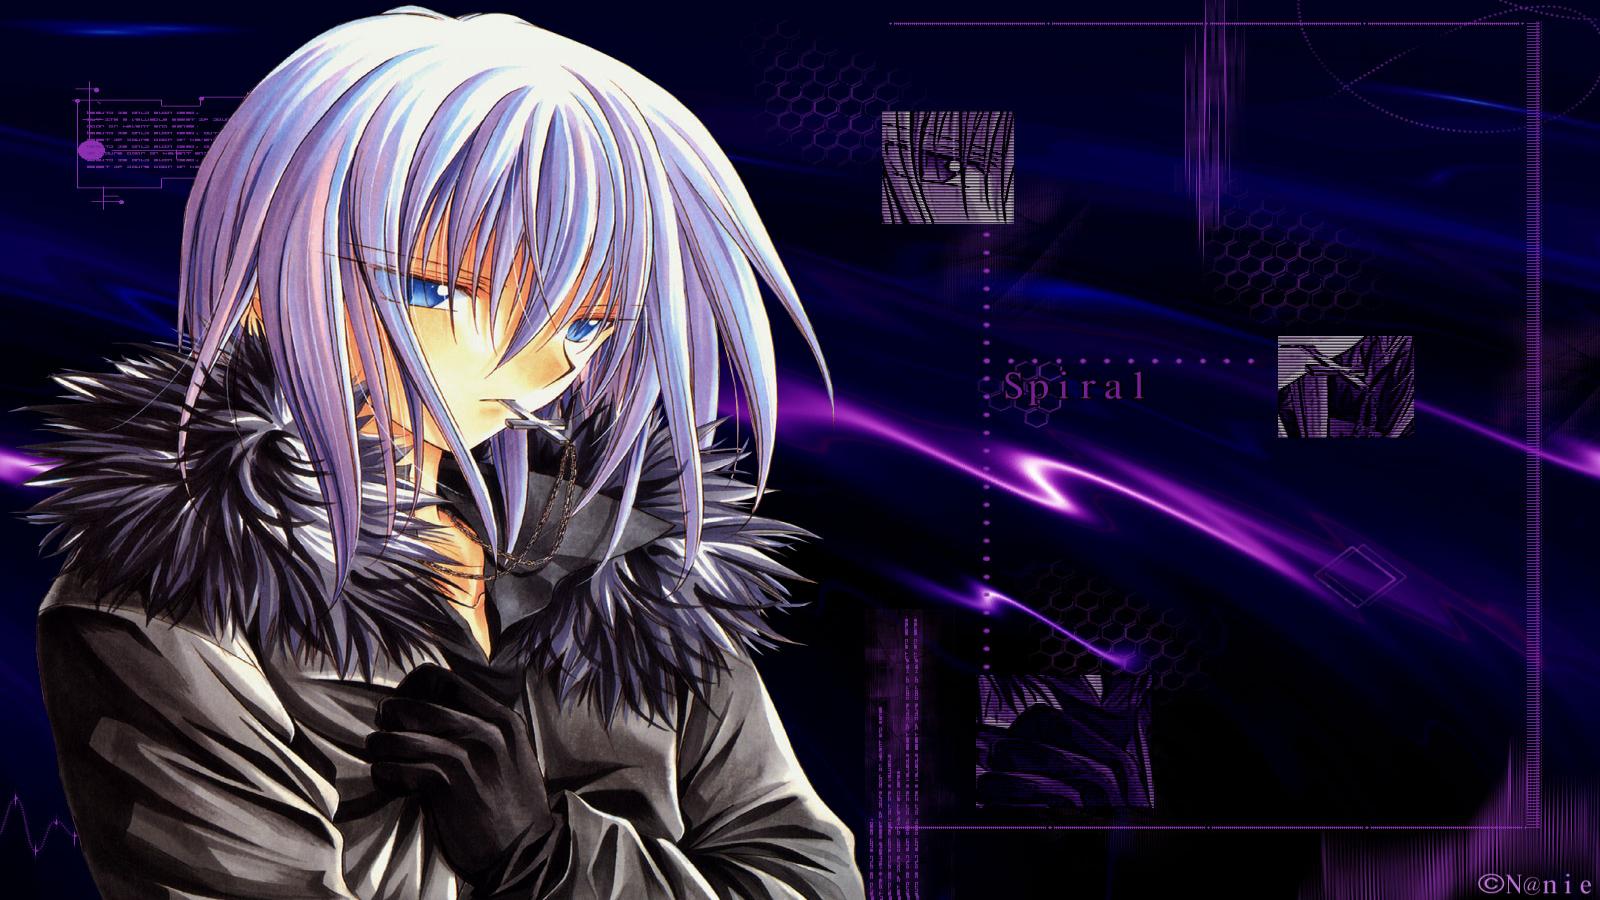  Tech Anime HD Wallpapers 1600x900 Anime Wallpapers 1600x900 Download